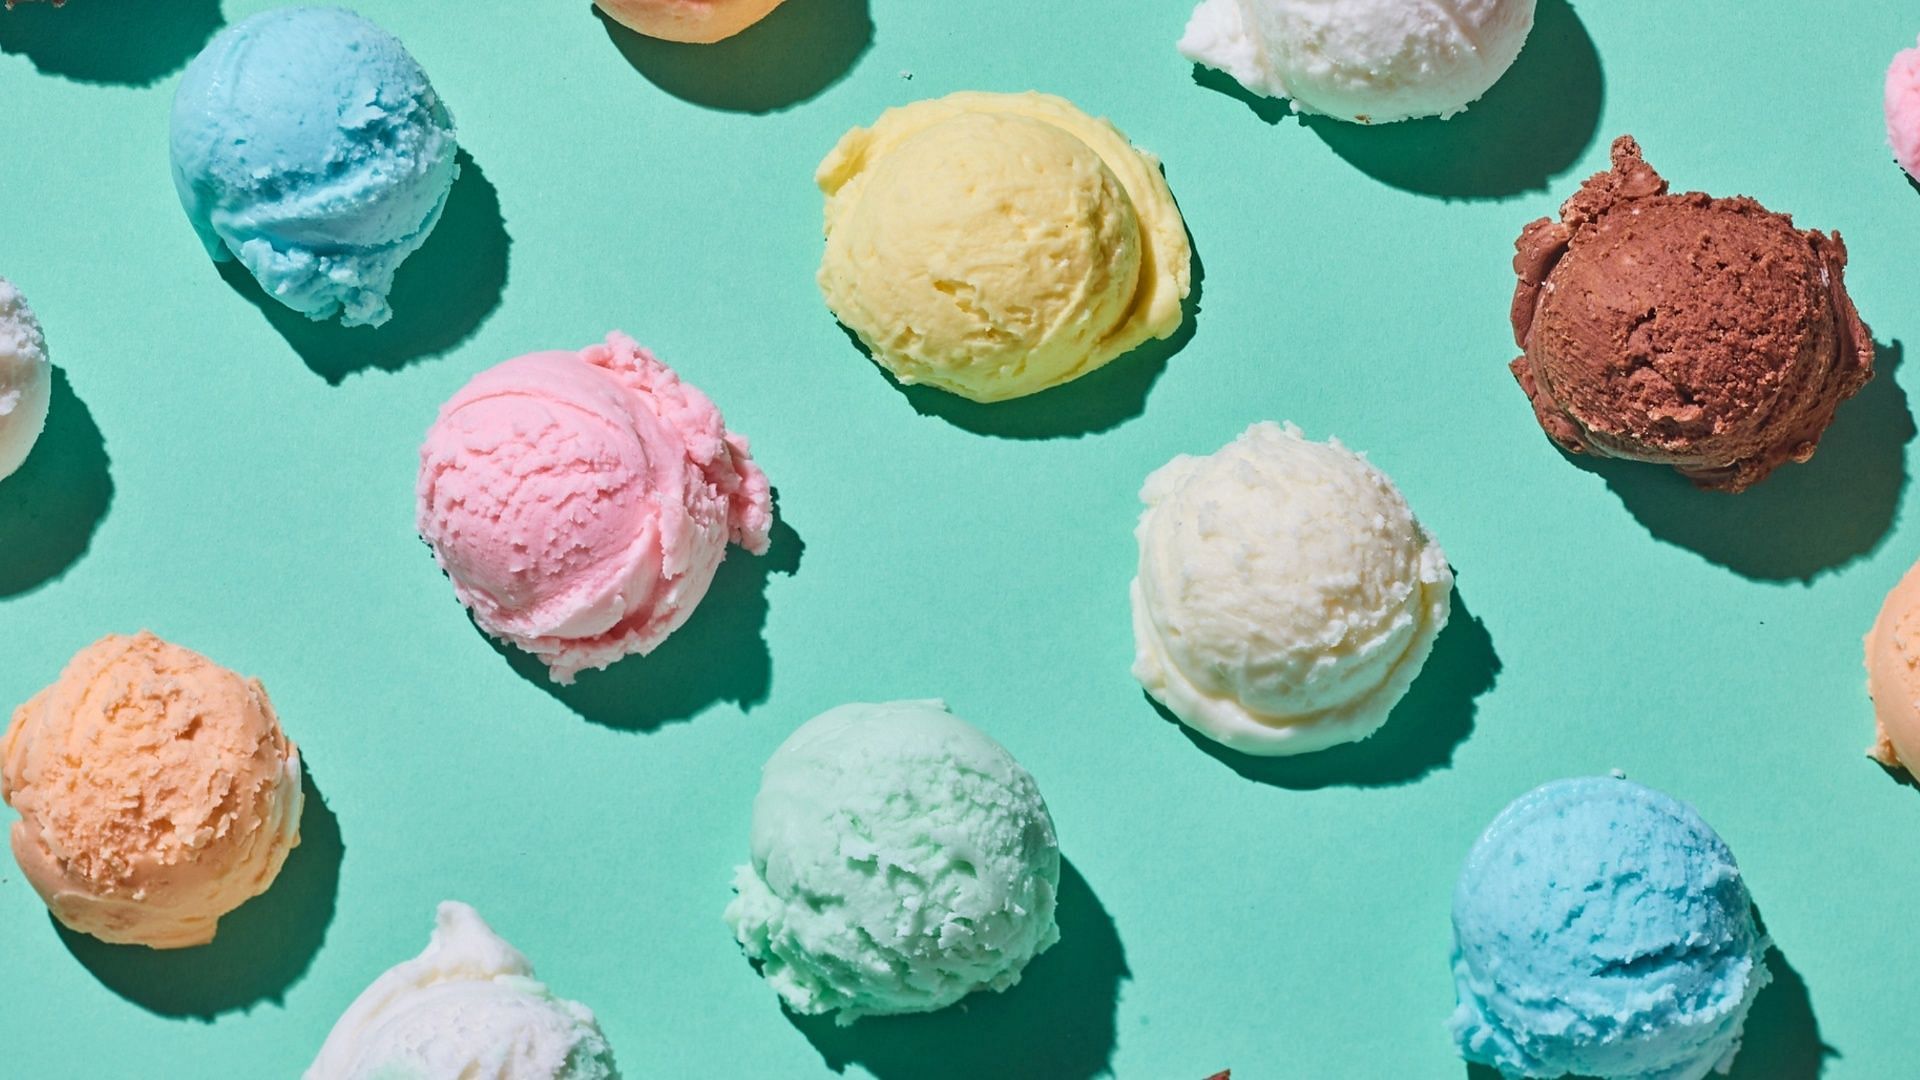 Share the love for ice cream with your dear ones as America celebrates National Ice Cream Day on July 16 (Image via Foodandstyle/ Getty Images)